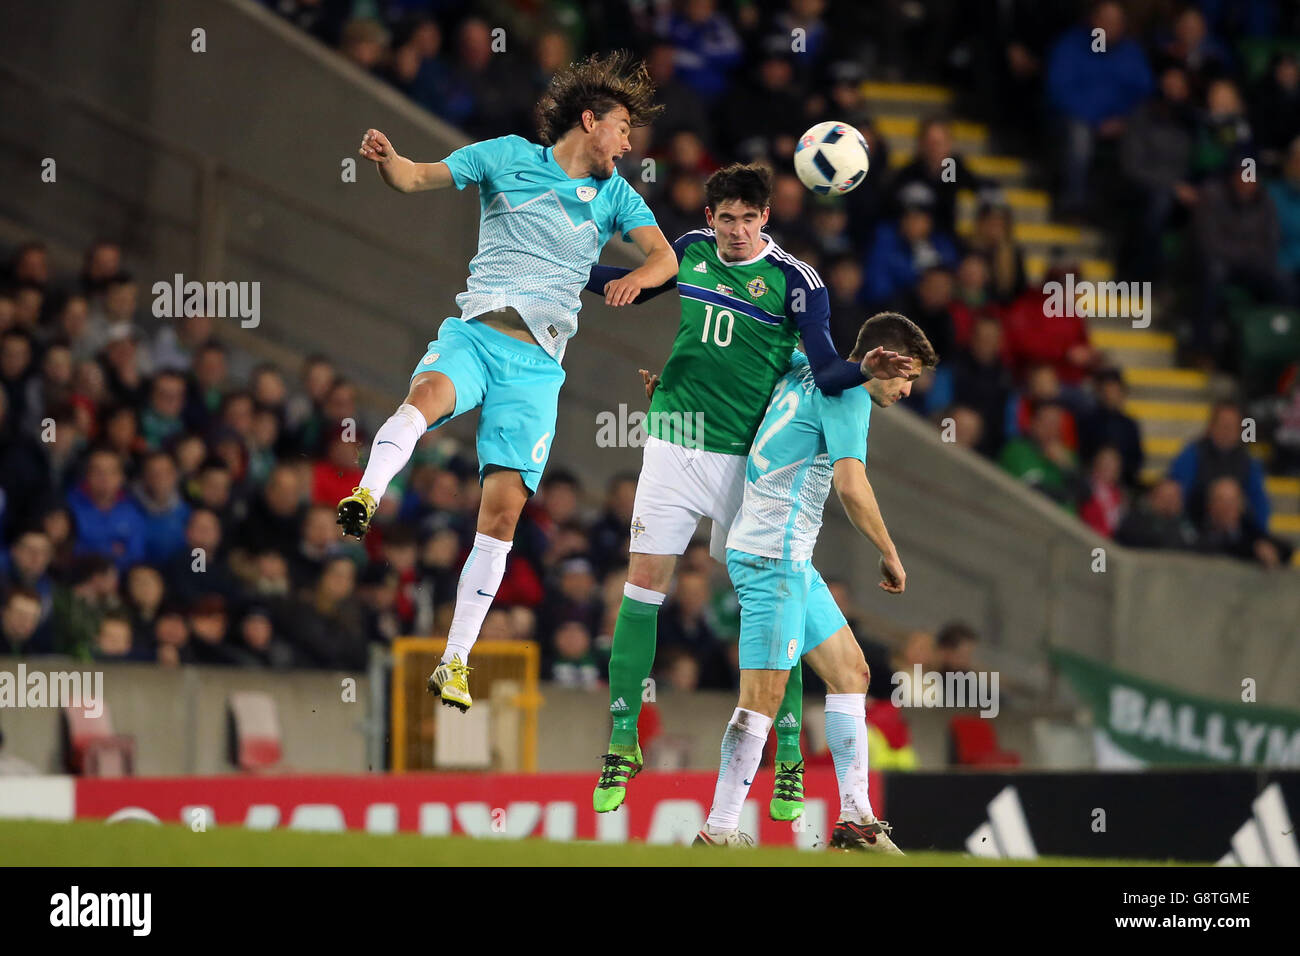 Slovenia's Krhin Rene (left) and Northern Ireland's Kyle Lafferty battle for the ball during an International Friendly at Windsor Park, Belfast. PRESS ASSOCIATION Photo. Picture date: Monday March 28, 2016. See PA story SOCCER N Ireland. Photo credit should read: Niall Carson/PA Wire. Stock Photo